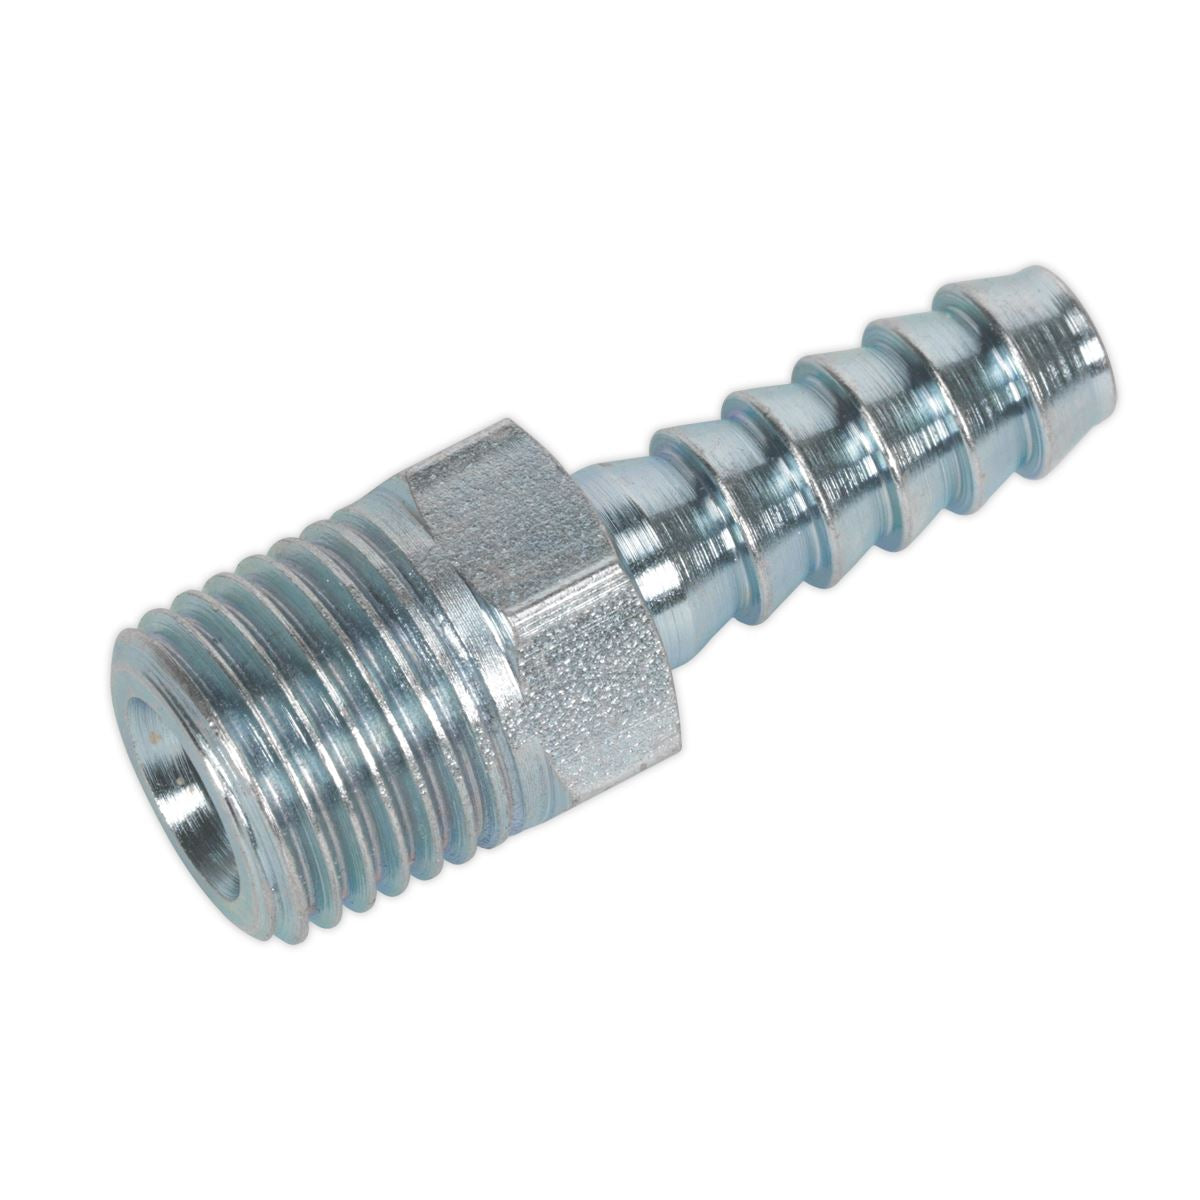 PCL Screwed Tailpiece Male 1/4"BSPT - 1/4" Hose Pack of 5